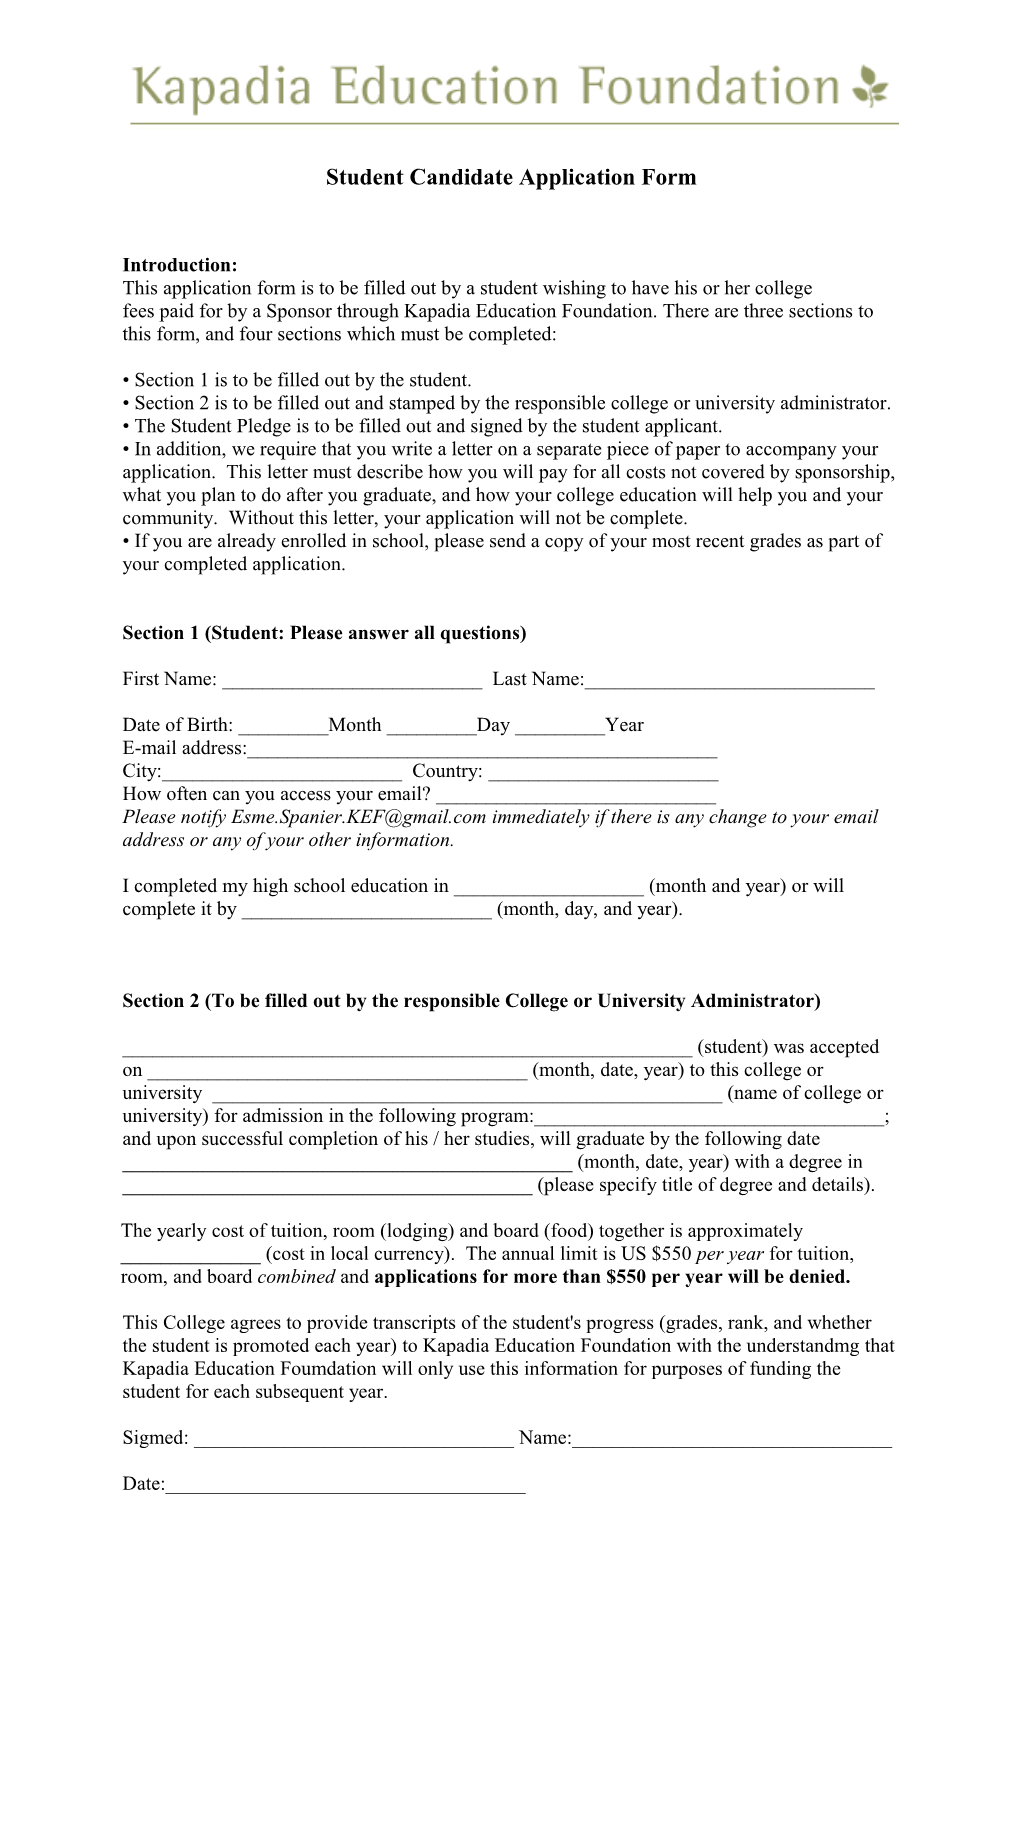 Student Candidate Application Form